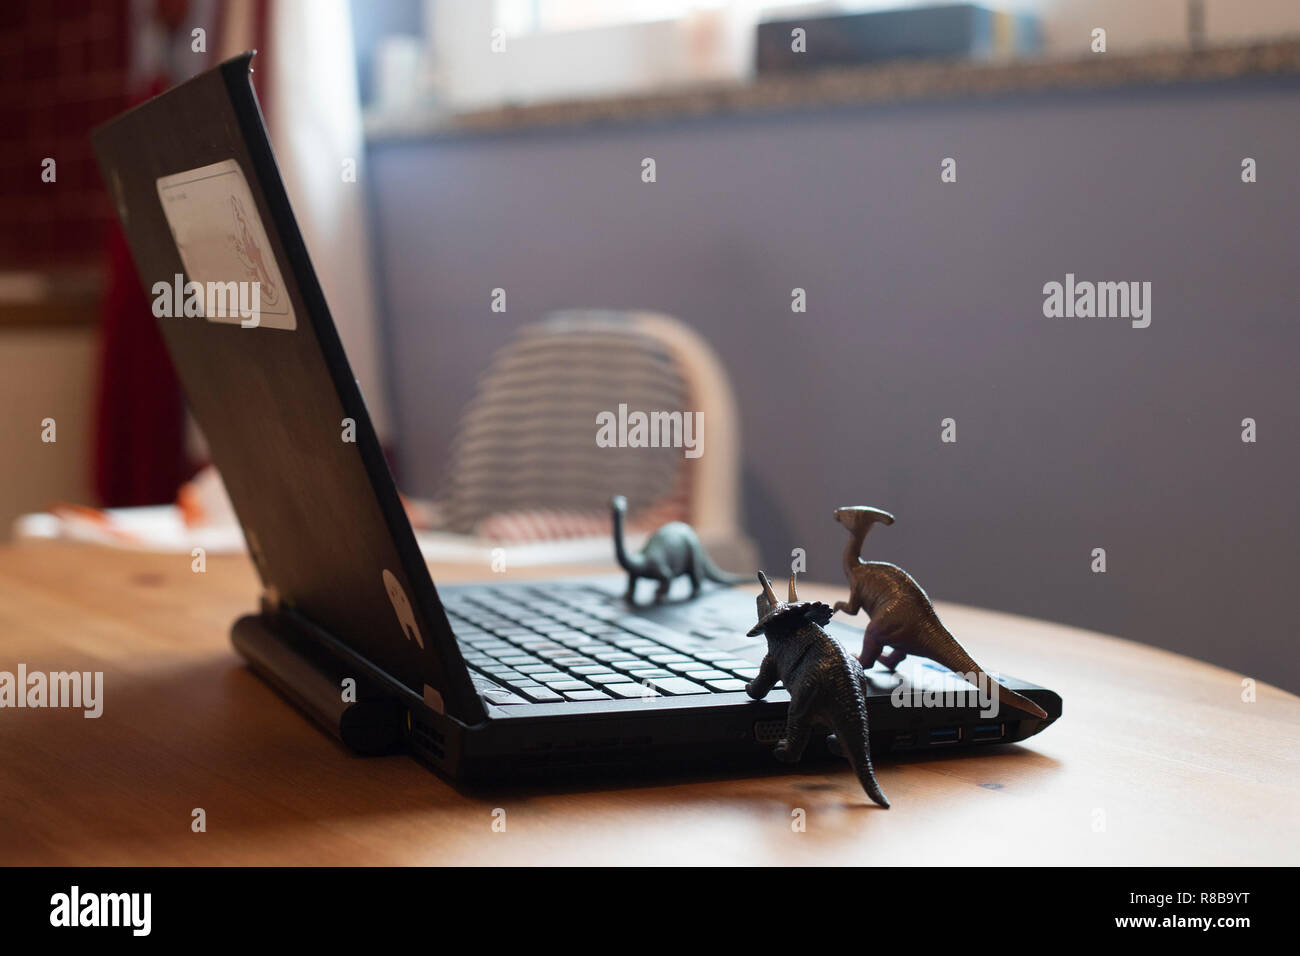 Open laptop on wooden table with small dinosaur toys that seem looking at the screen. Natural light. Smartworking during lockdown symbol. Stock Photo